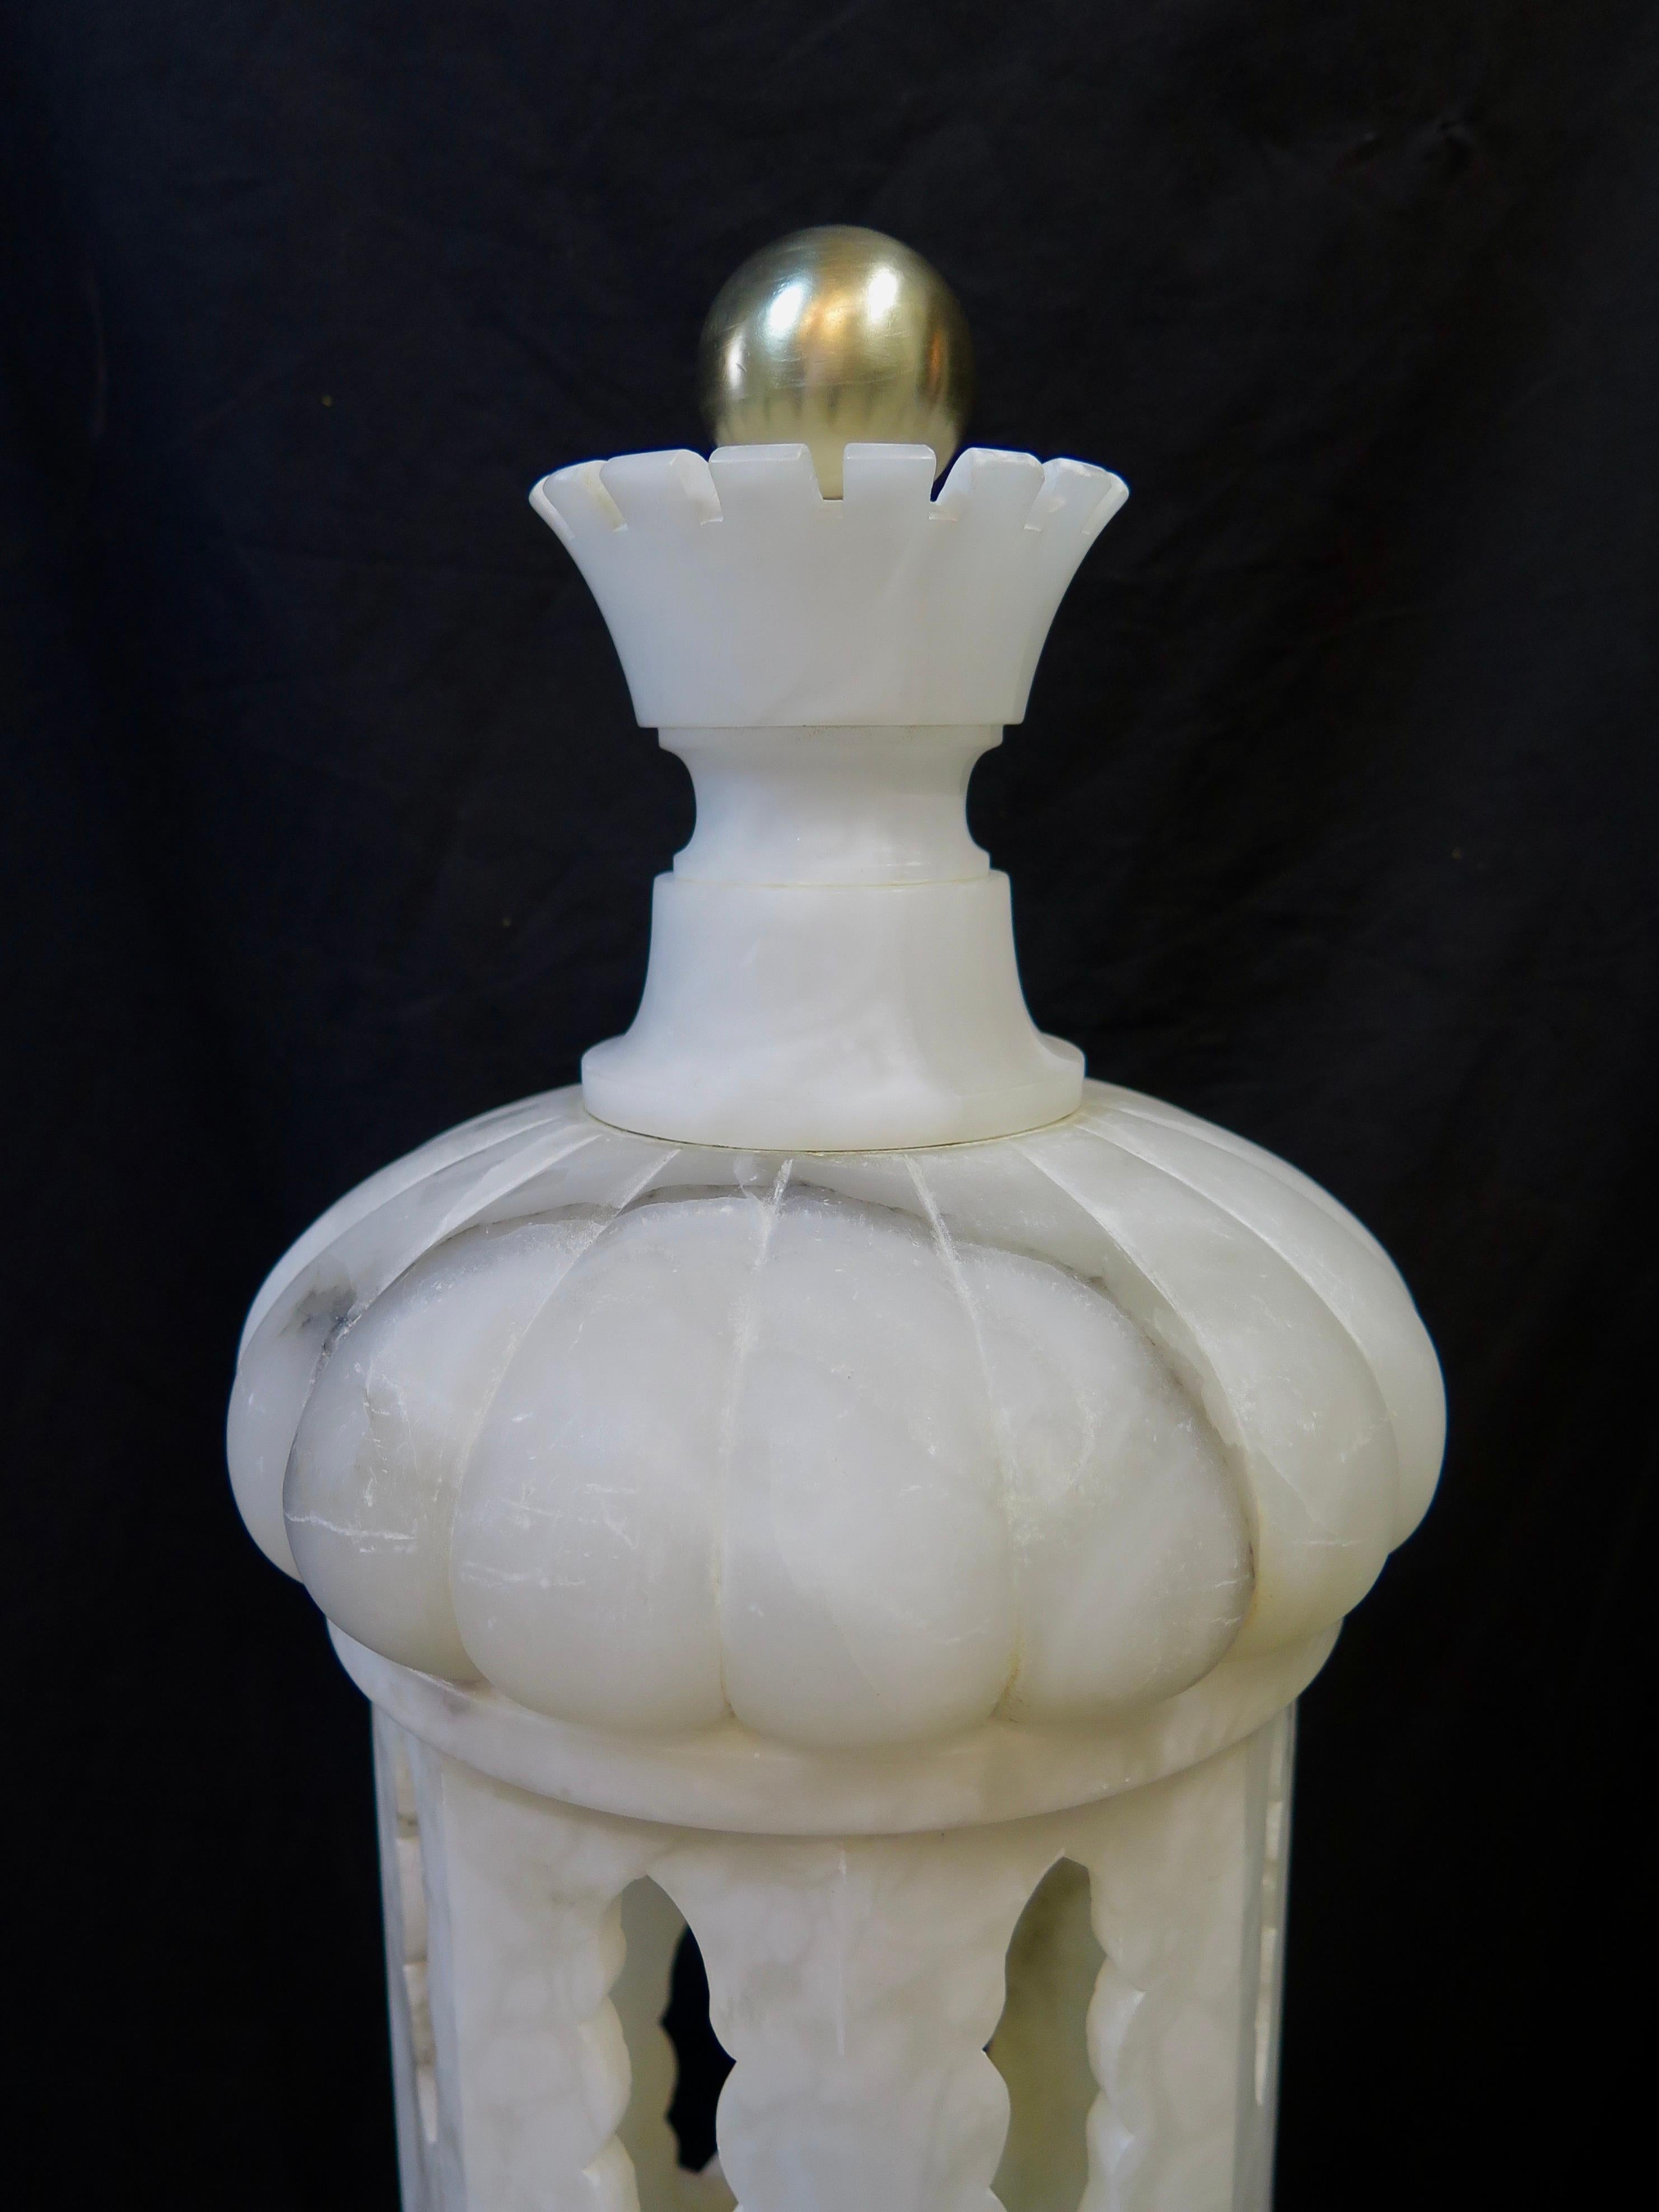 This stunning & stylish 1970's Italian hand made veined alabaster table lamp is beautifully designed with a wonderful gazebo like appearance. The body of the lamp is decorated with unique cut out windows & has a removable dome cap allowing access to